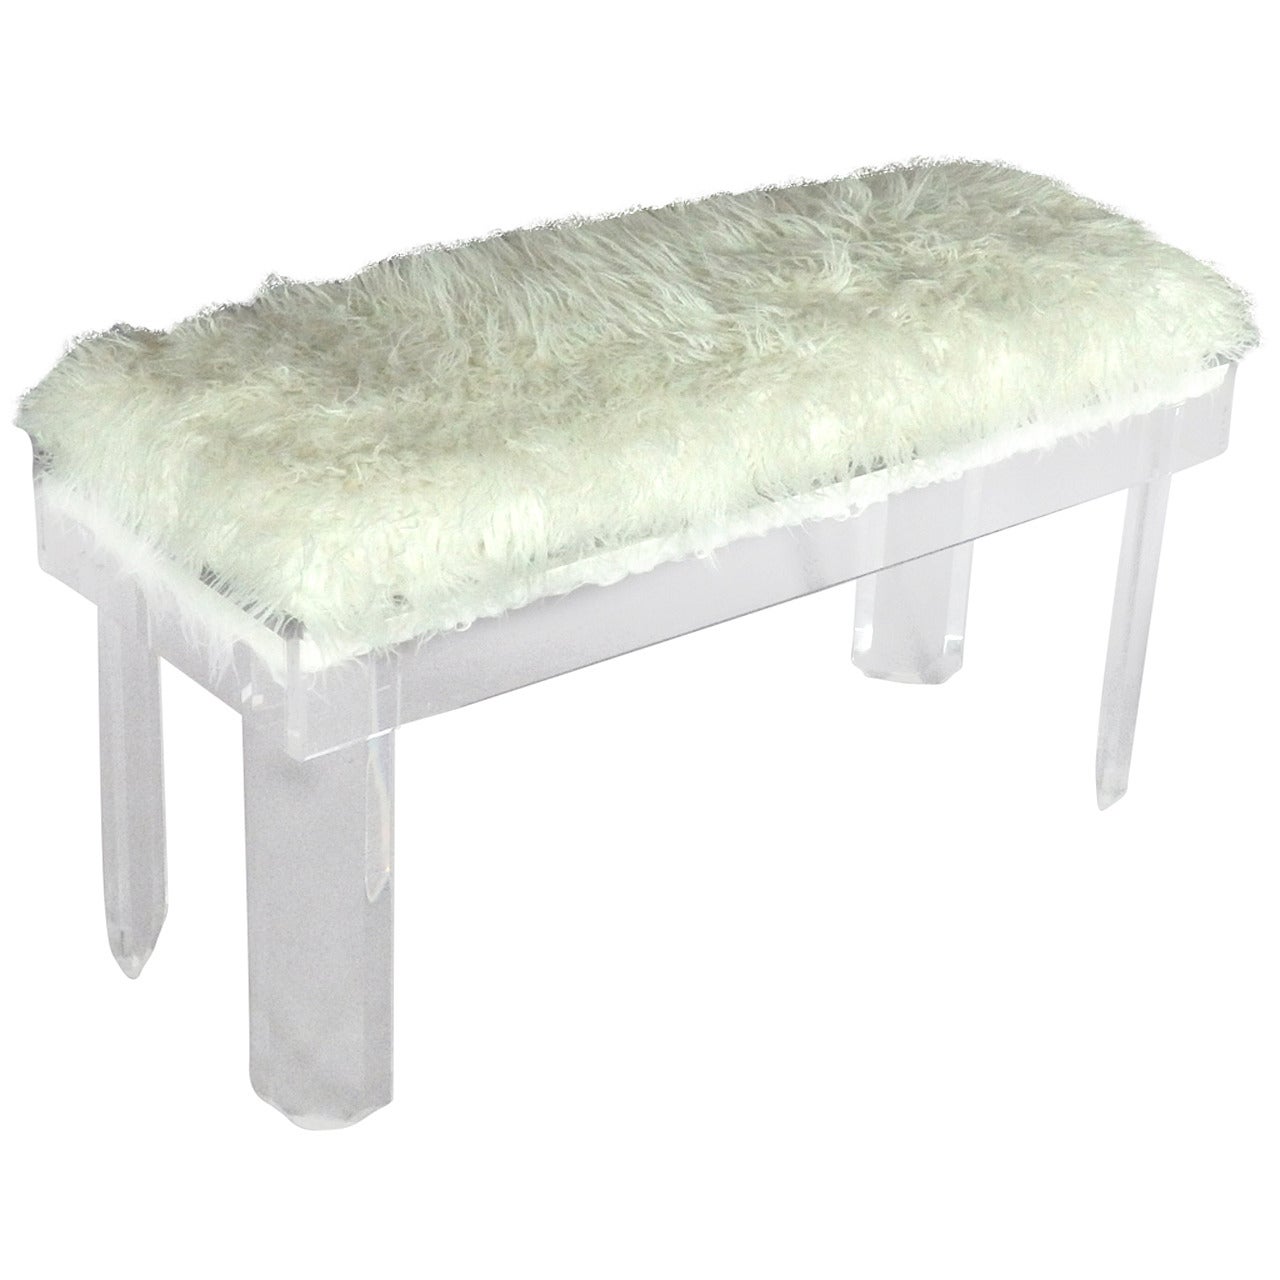 Acrylic Lucite bench upholstered in white faux fur For Sale